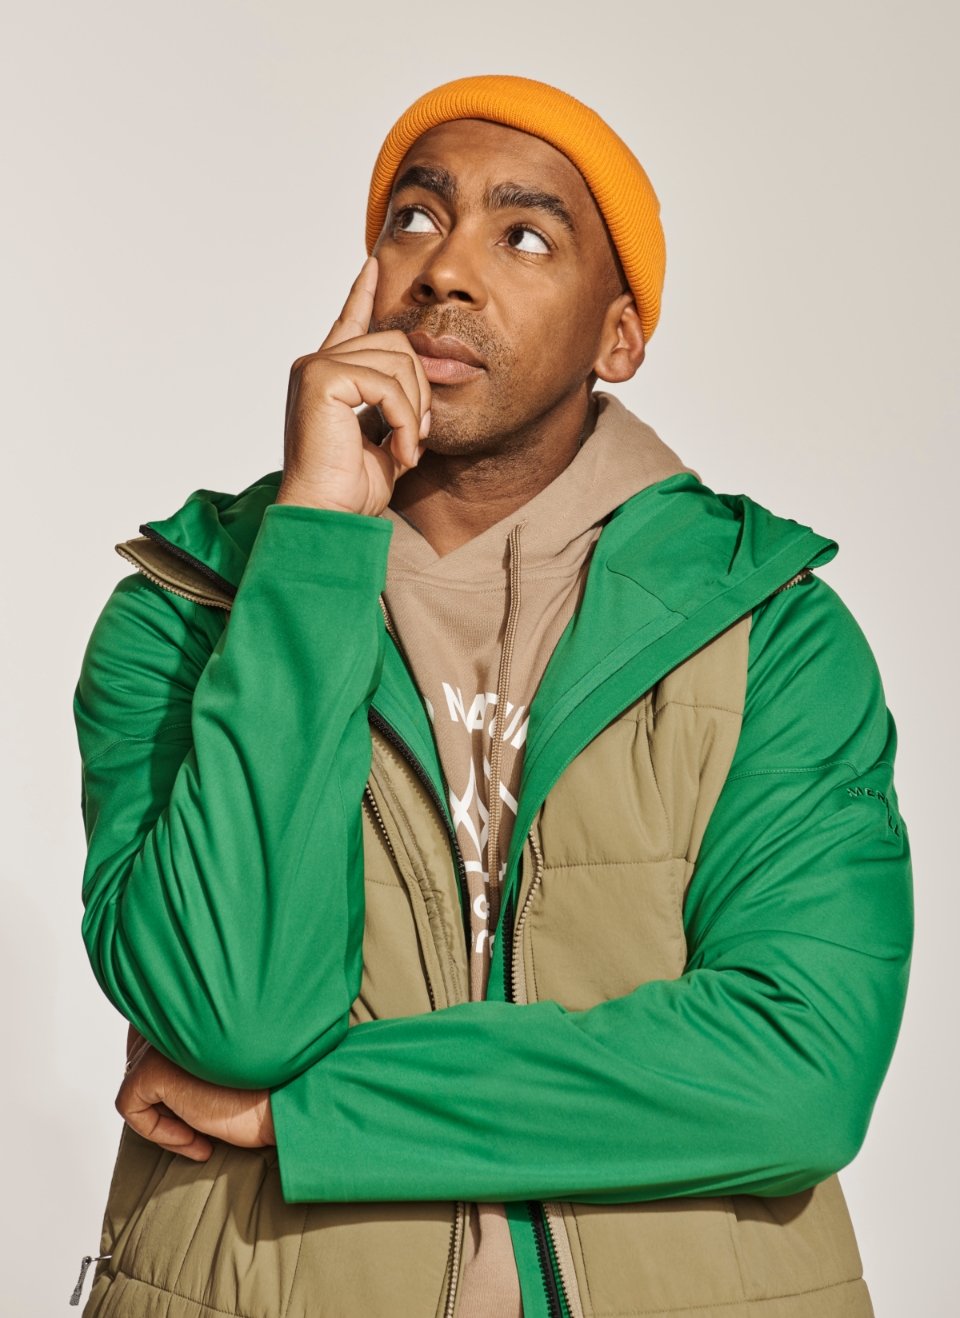 Jason Bolden wearing a green Merrell jacket coat, looking off into the distance, deep in thought.